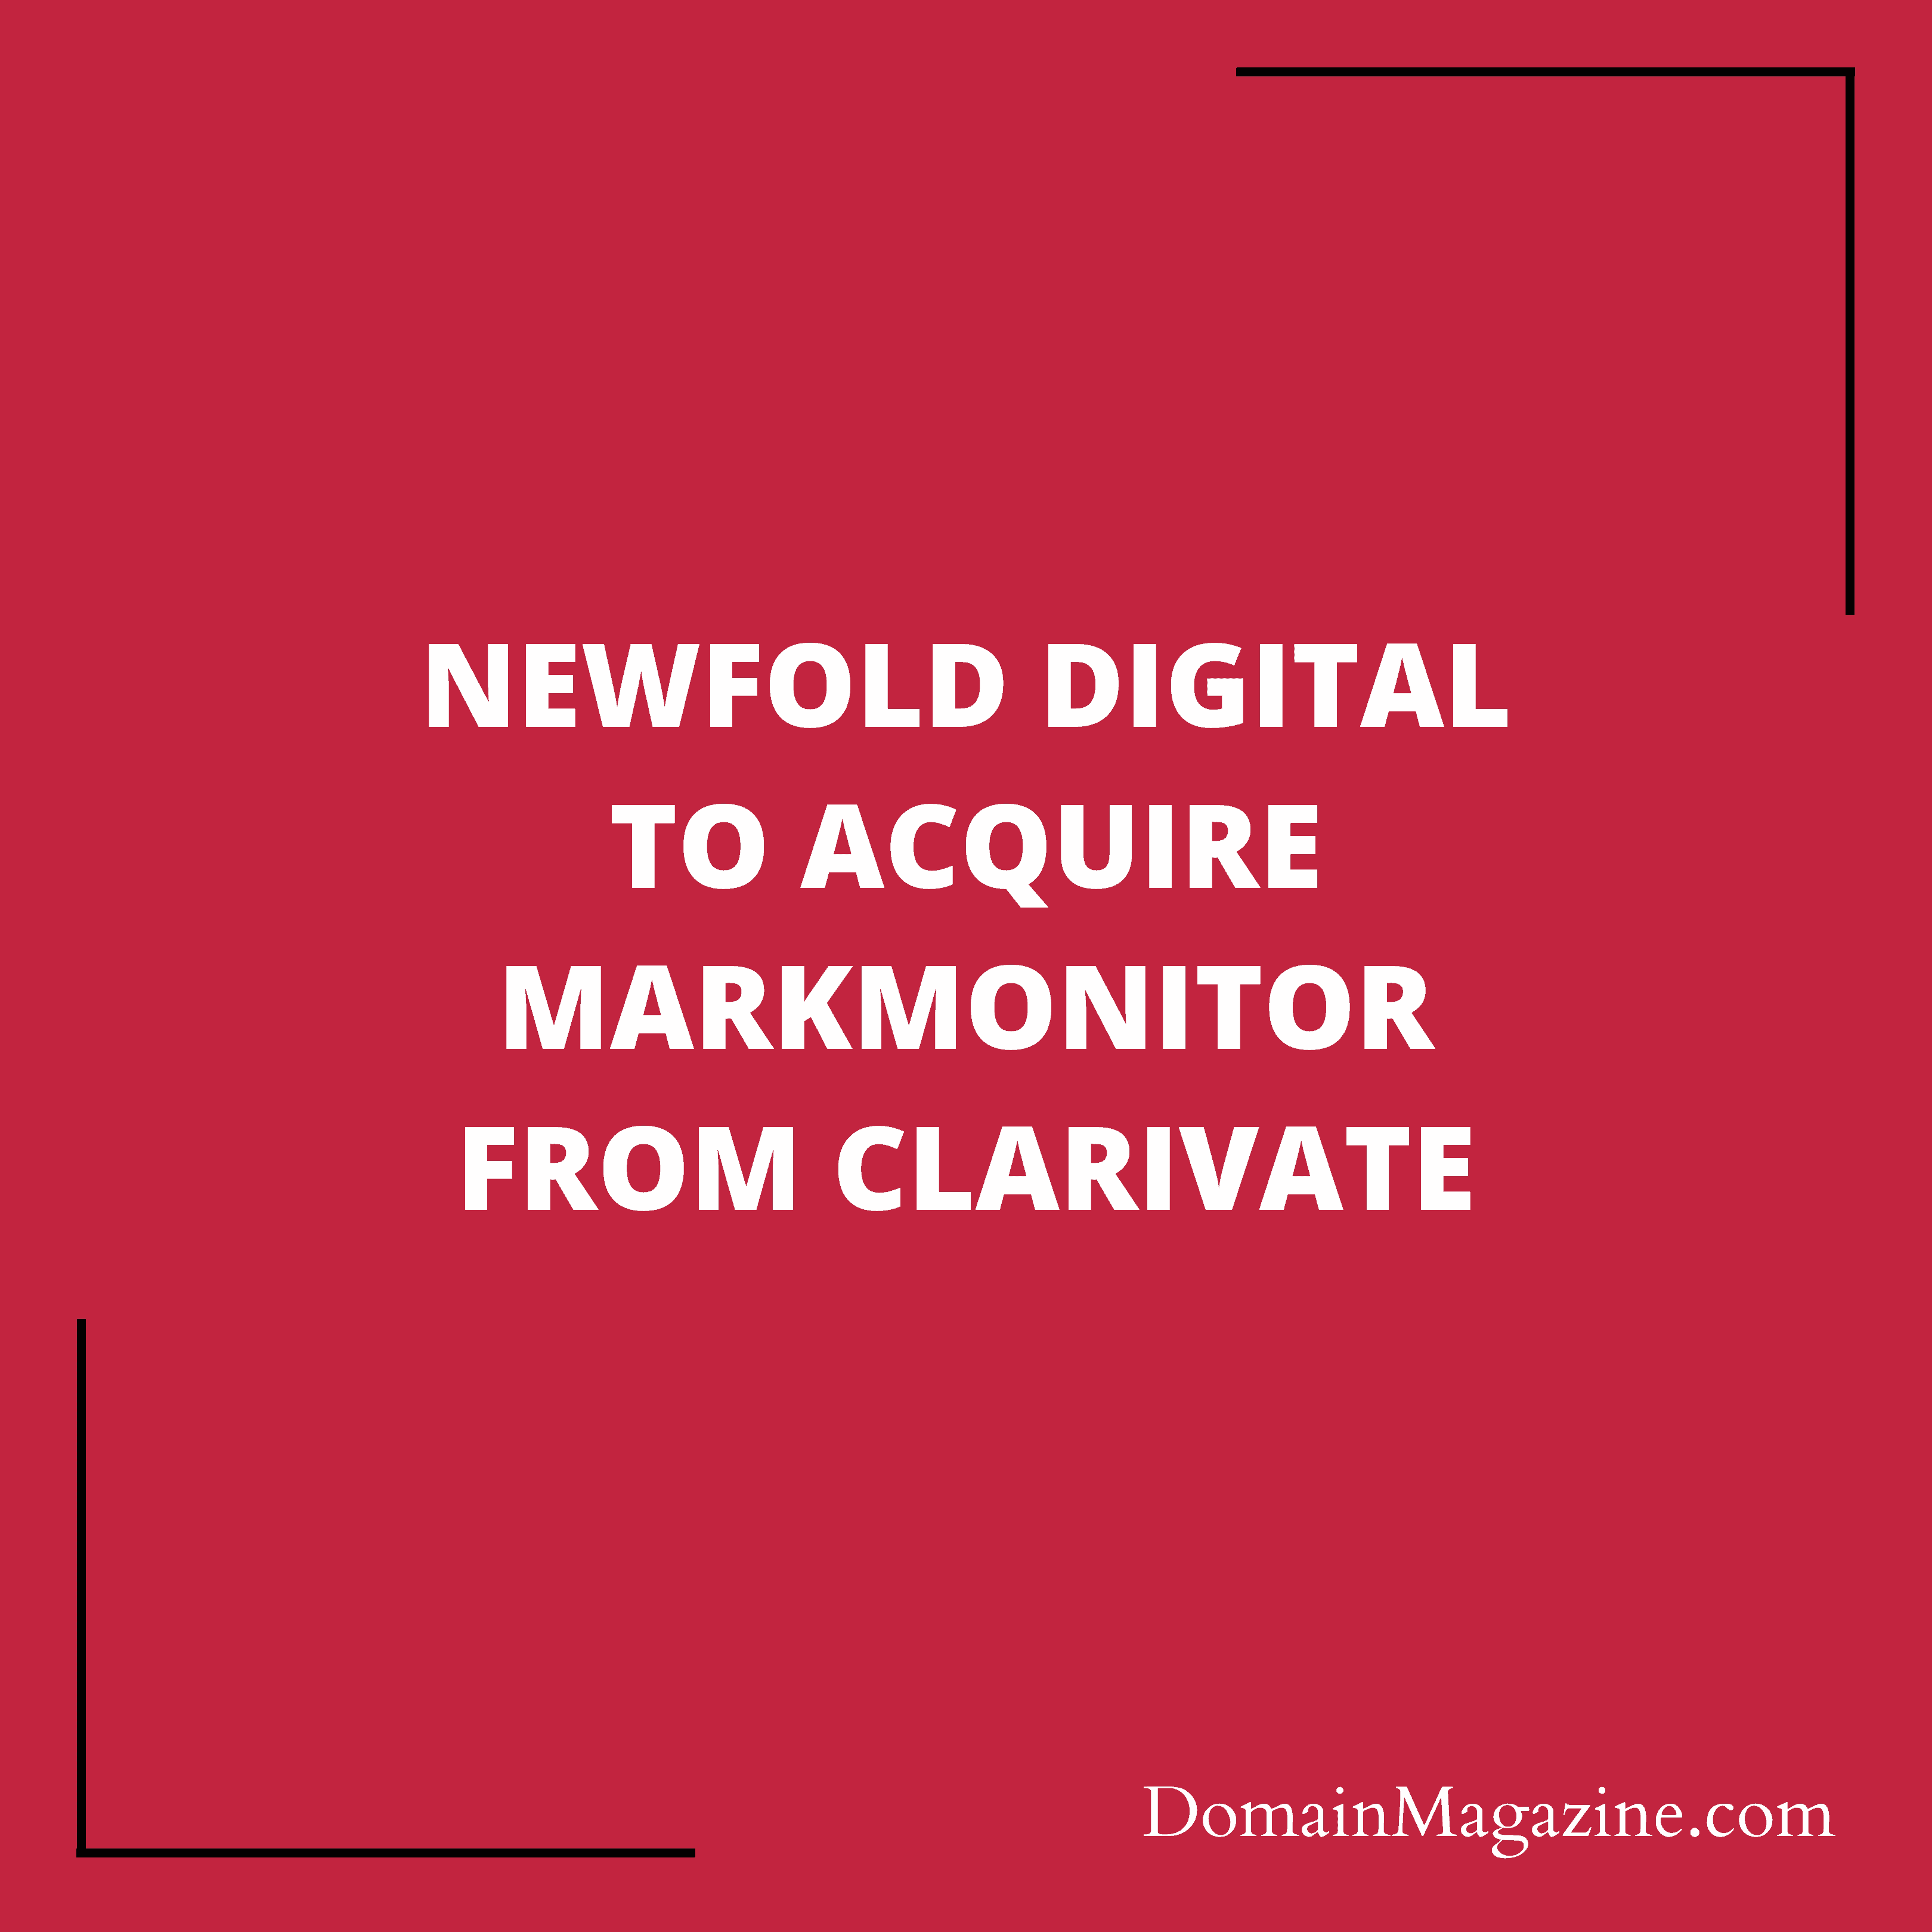 Newfold Digital to acquire MarkMonitor from Clarivate